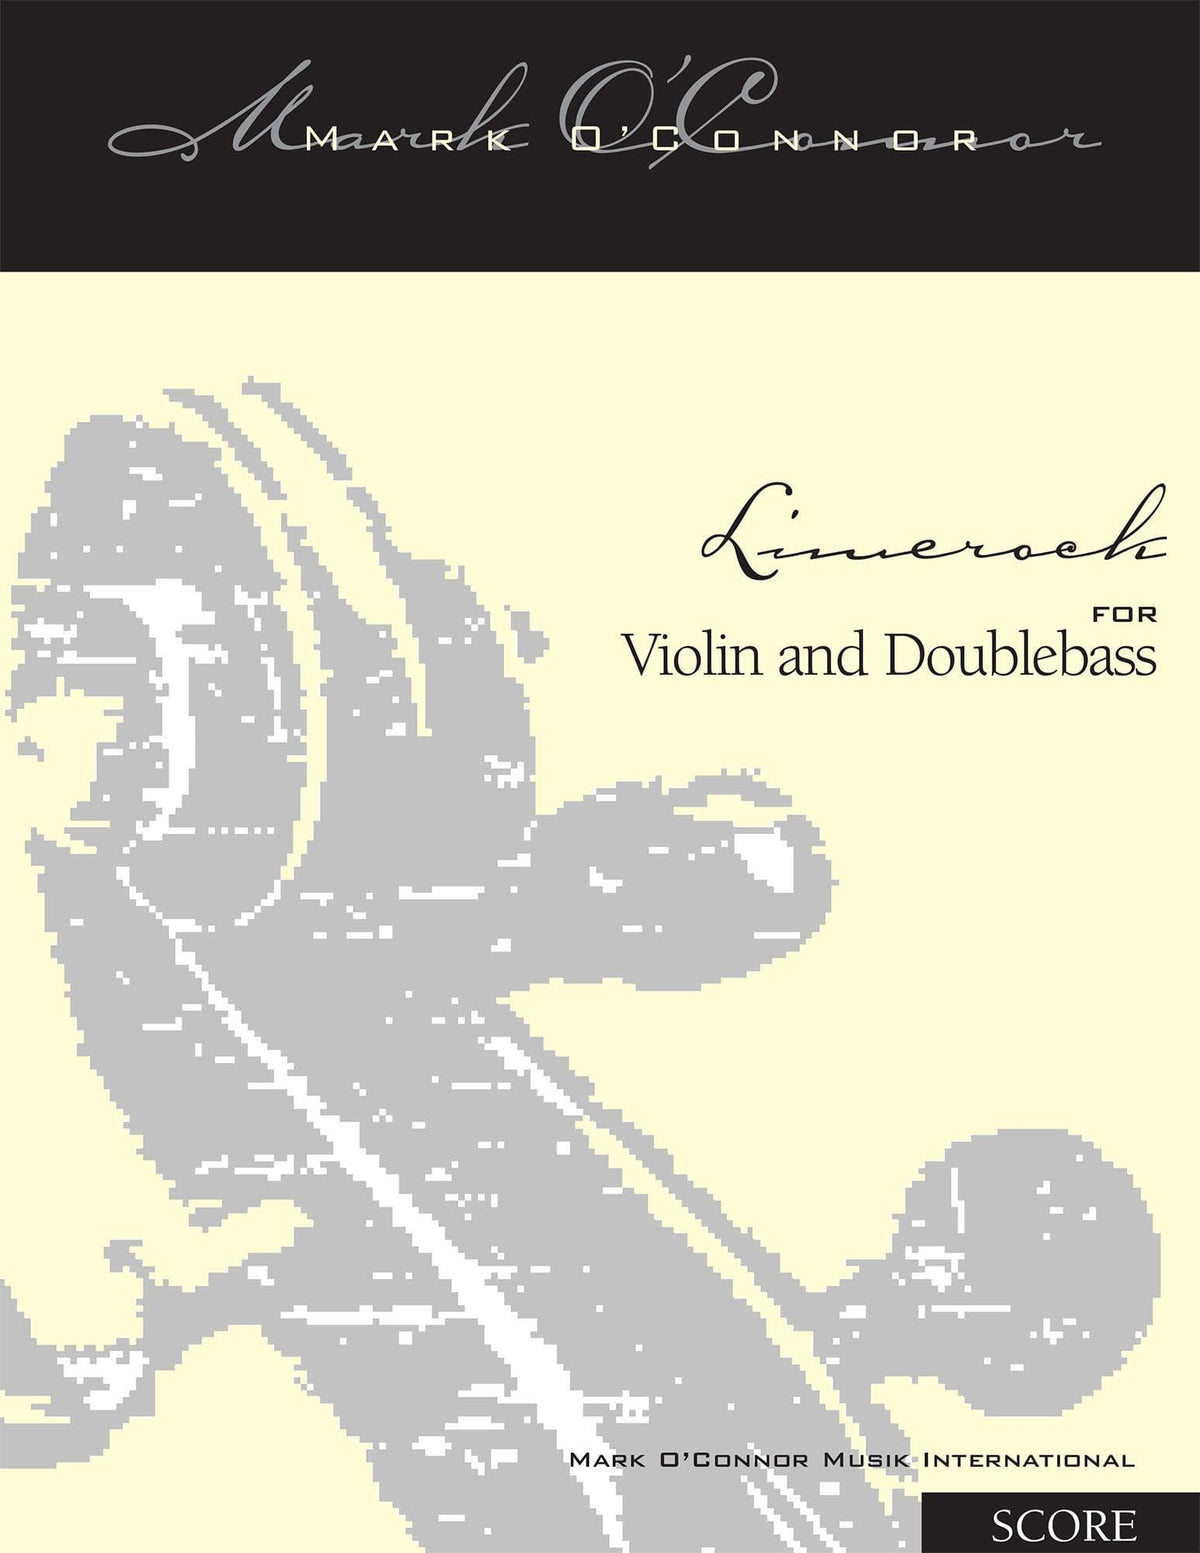 O'Connor, Mark - Limerock for Violin and Bass - Score - Digital Download